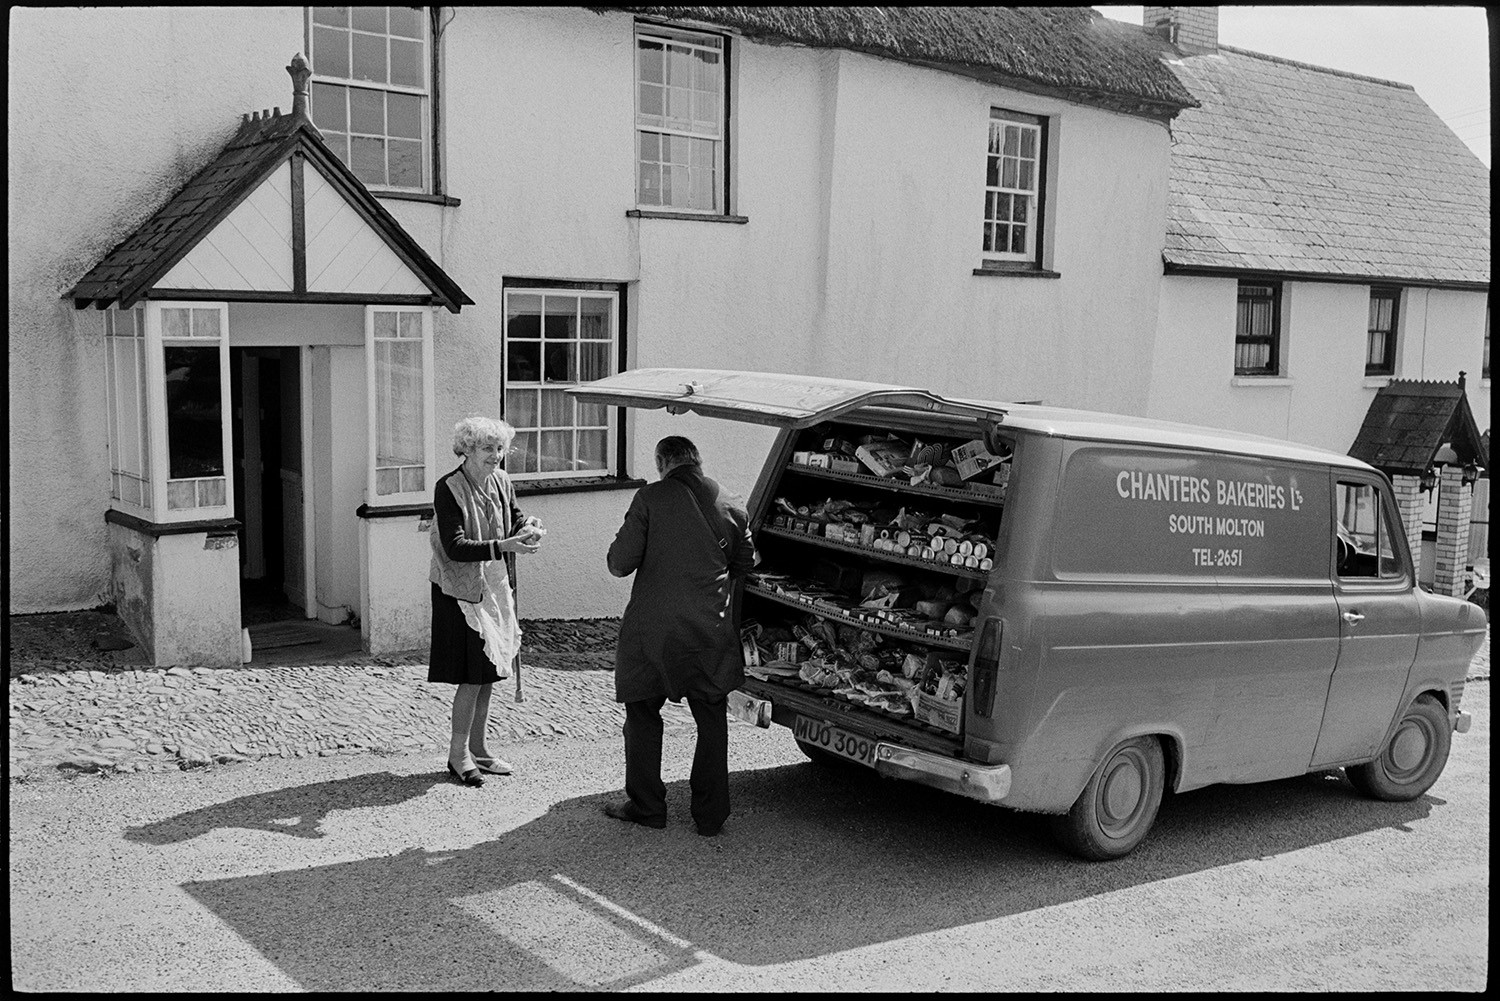 Baker selling from van. 
[A woman buying goods from a man with a Chanters Bakeries van, outside a cottage in Chittlehampton.]